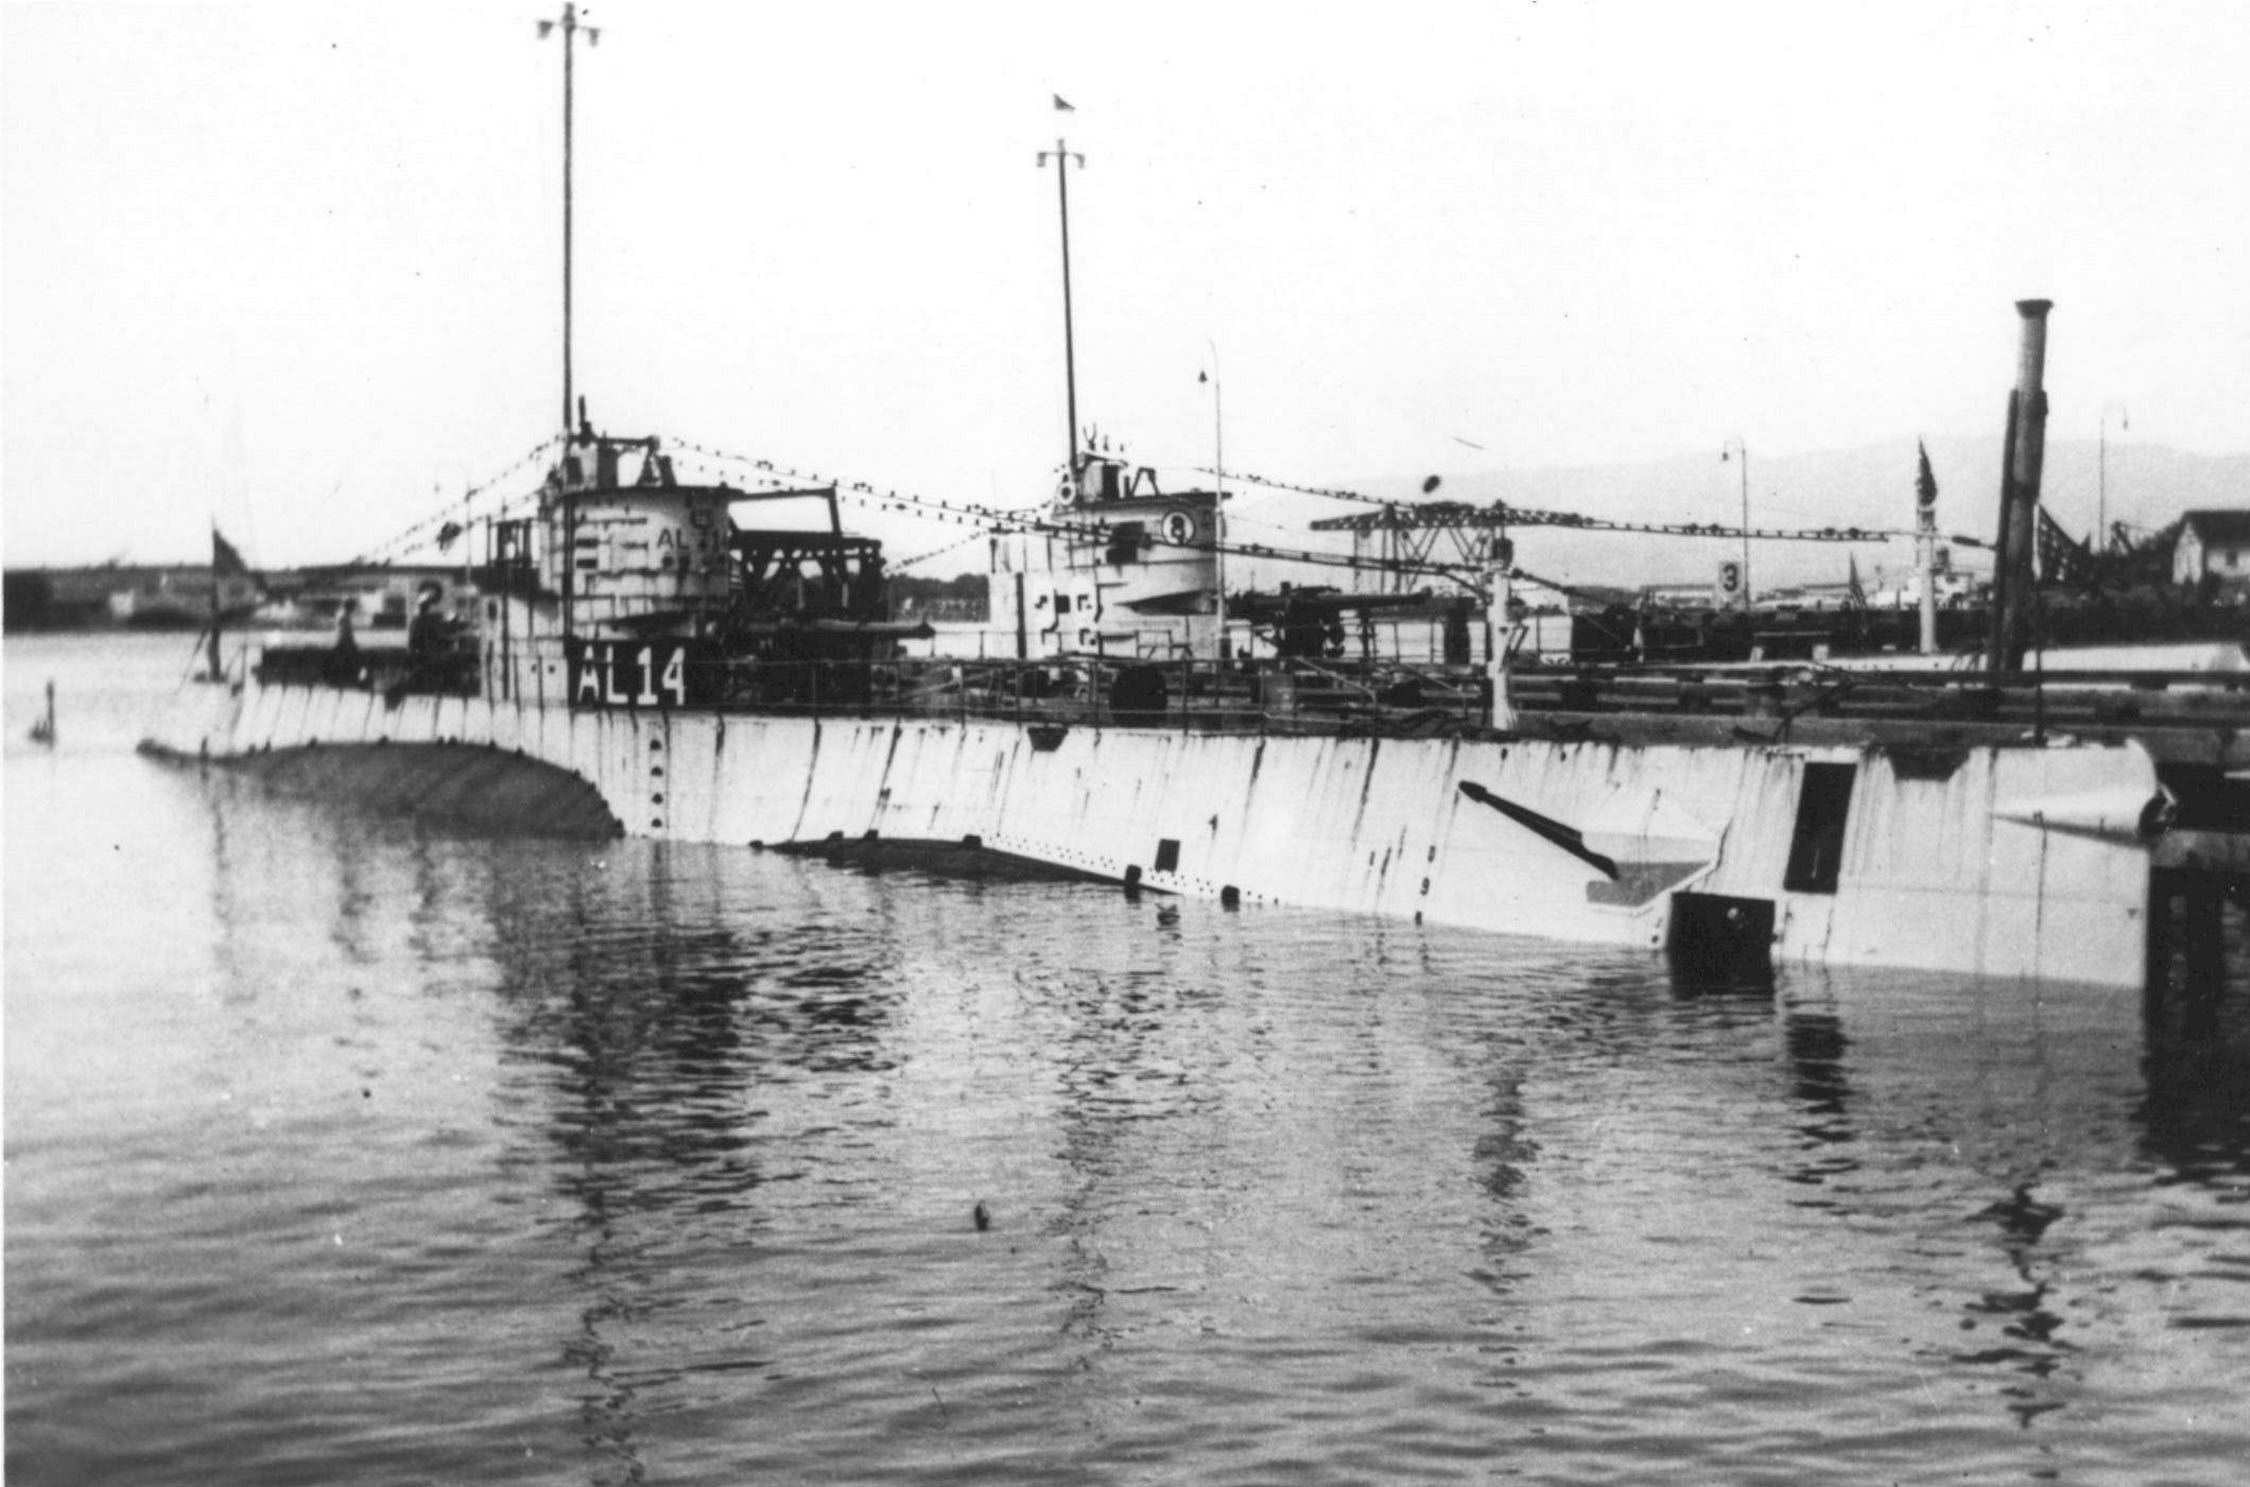 Submarines S-28 and S-31 dressed up as fictitious ships for the 1933 film 